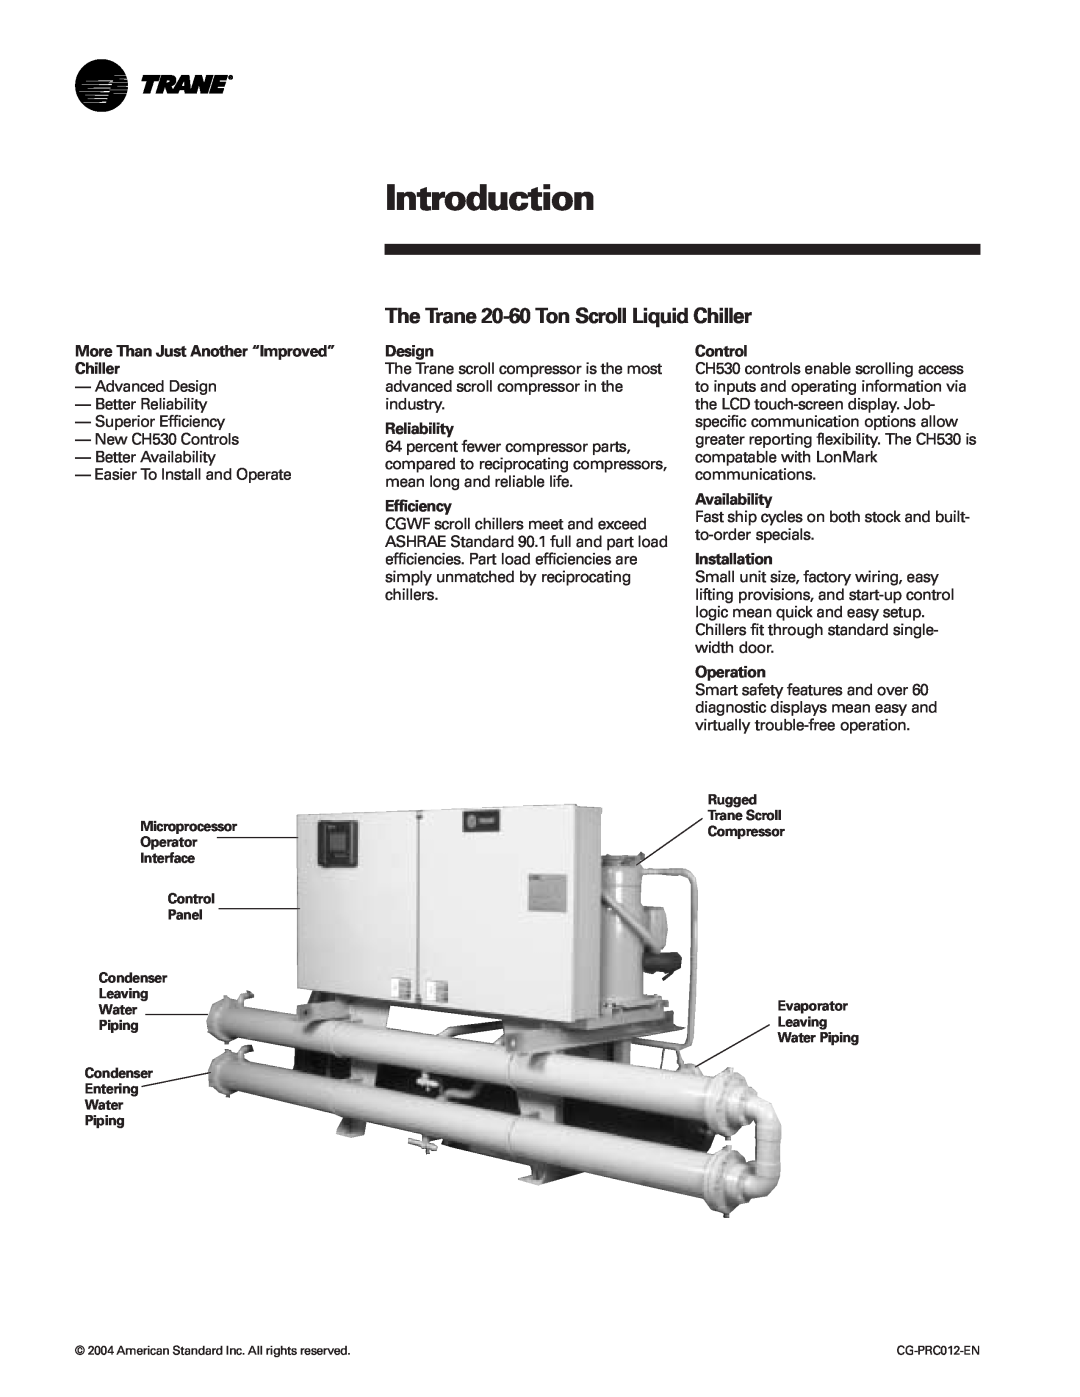 Trane CGWF Introduction, The Trane 20-60 Ton Scroll Liquid Chiller, More Than Just Another “Improved” Chiller, Design 